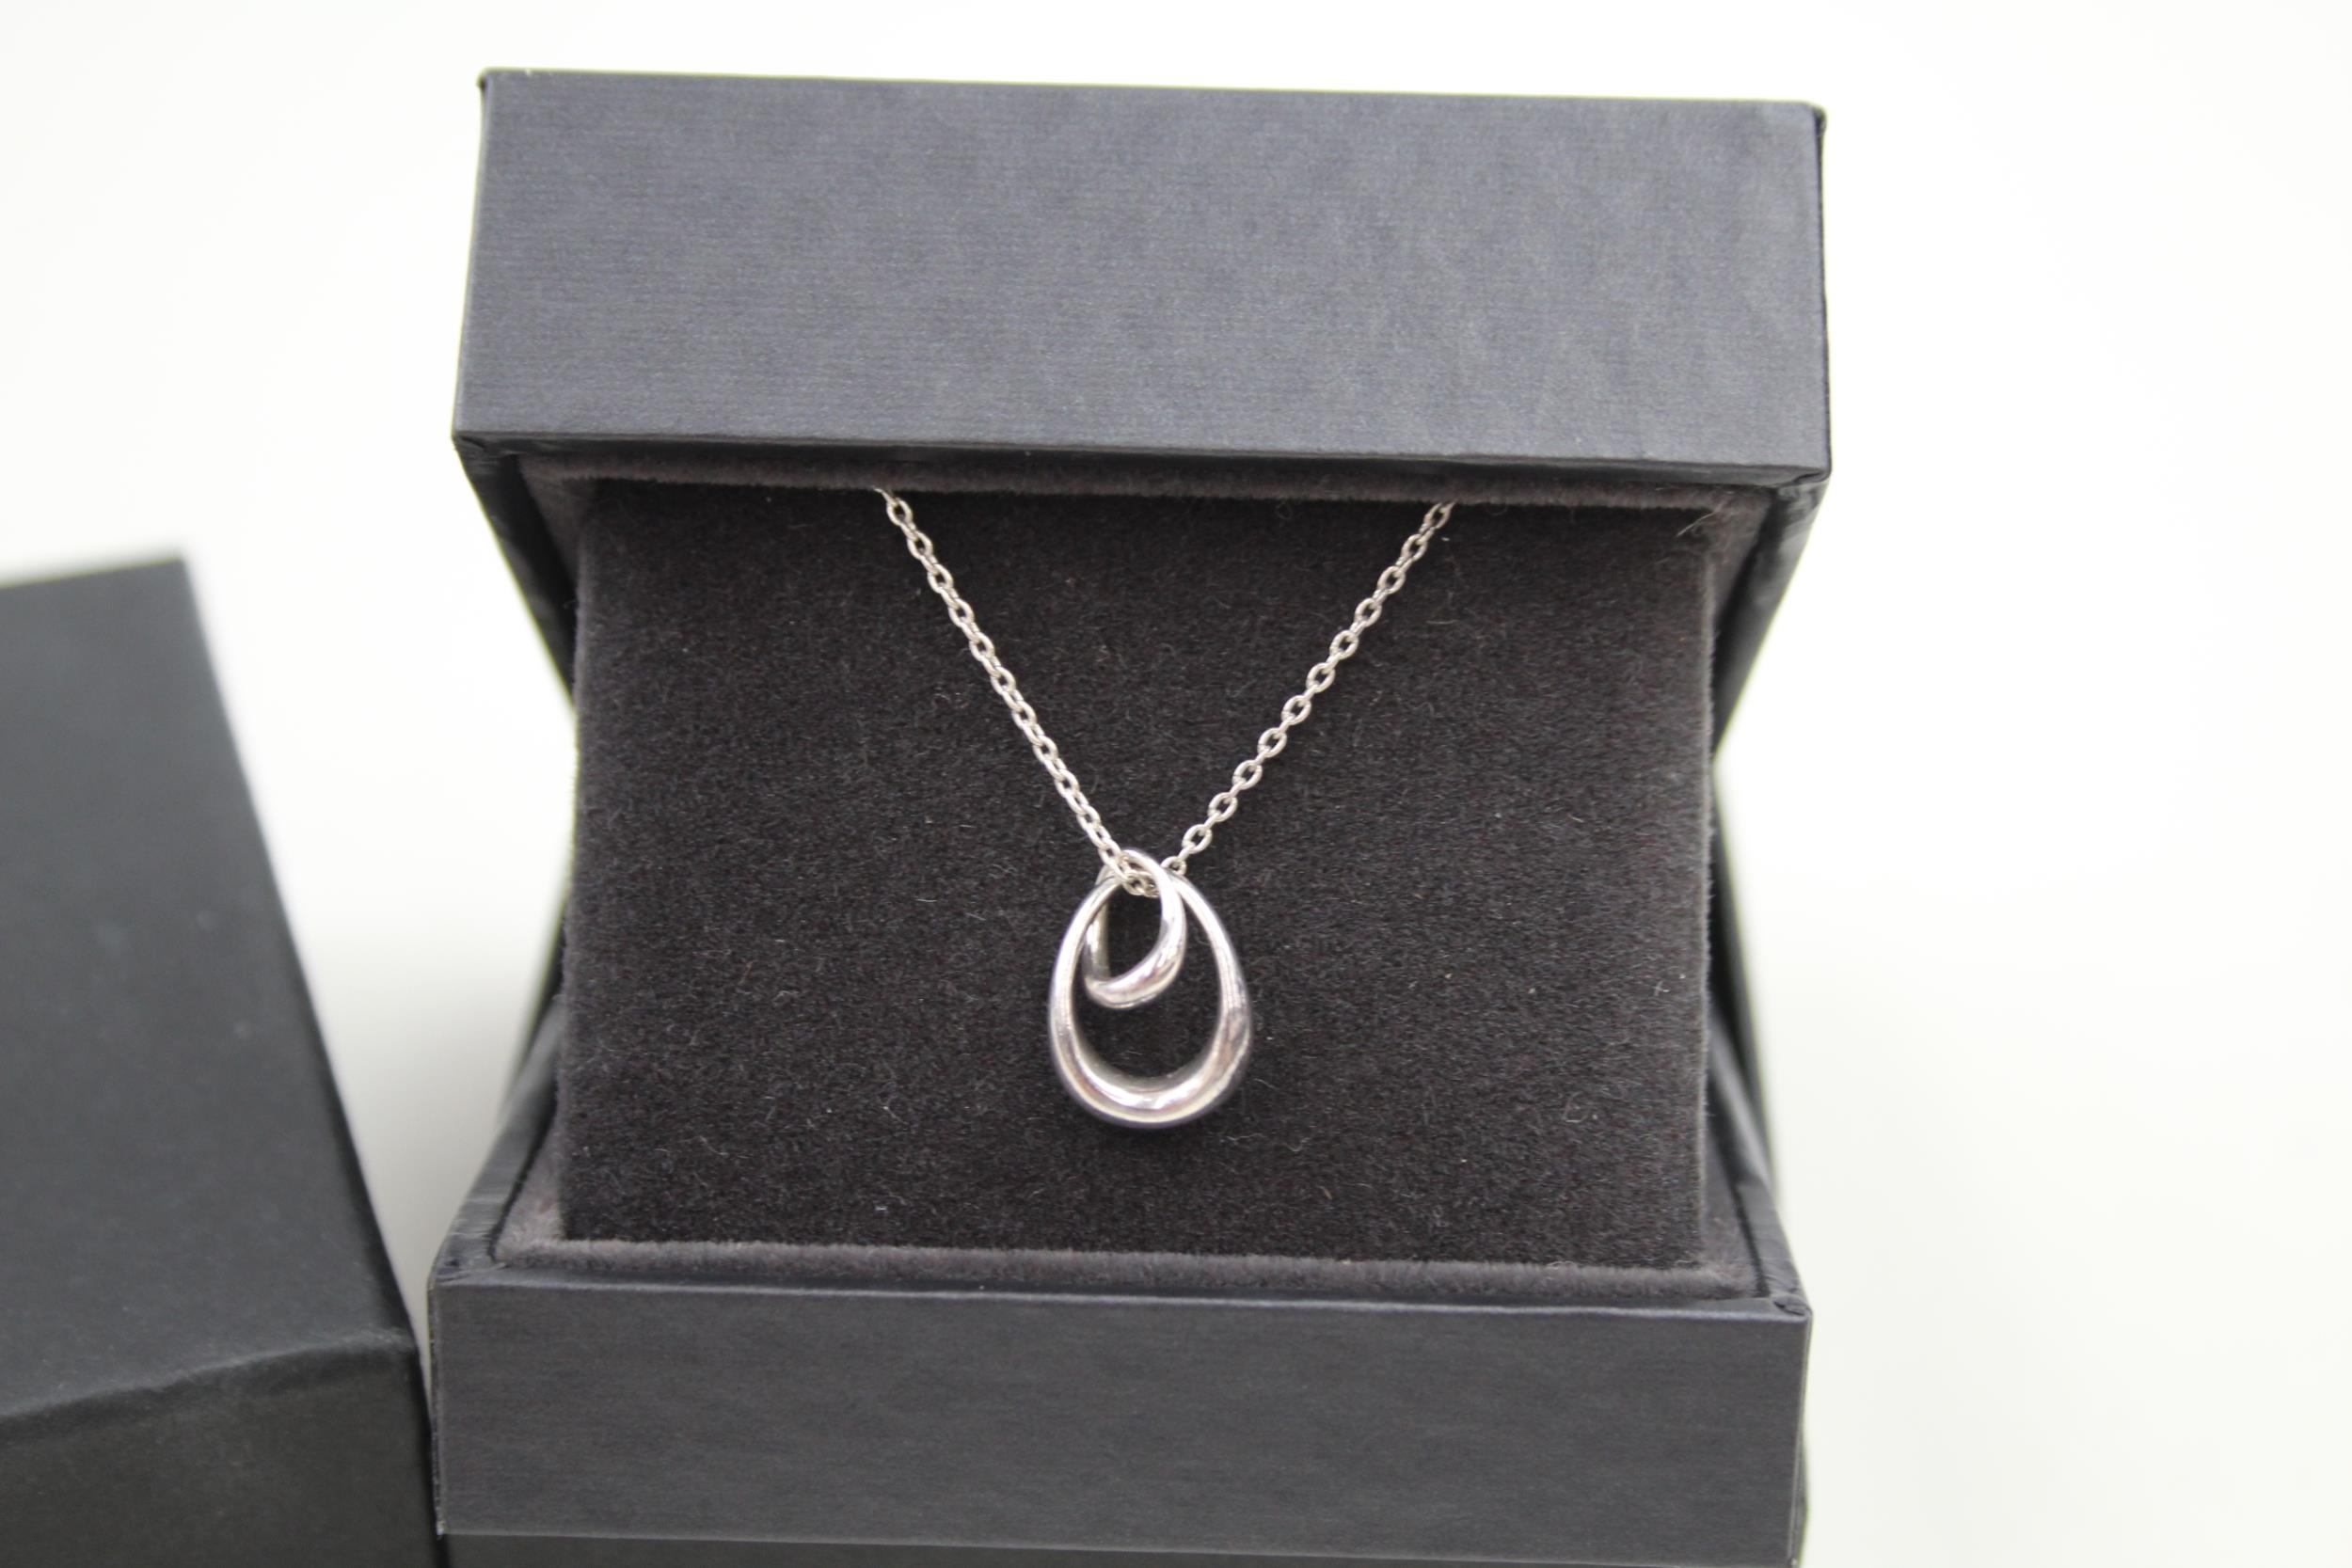 A silver pendant necklace by Georg Jensen (3g) - Image 2 of 5